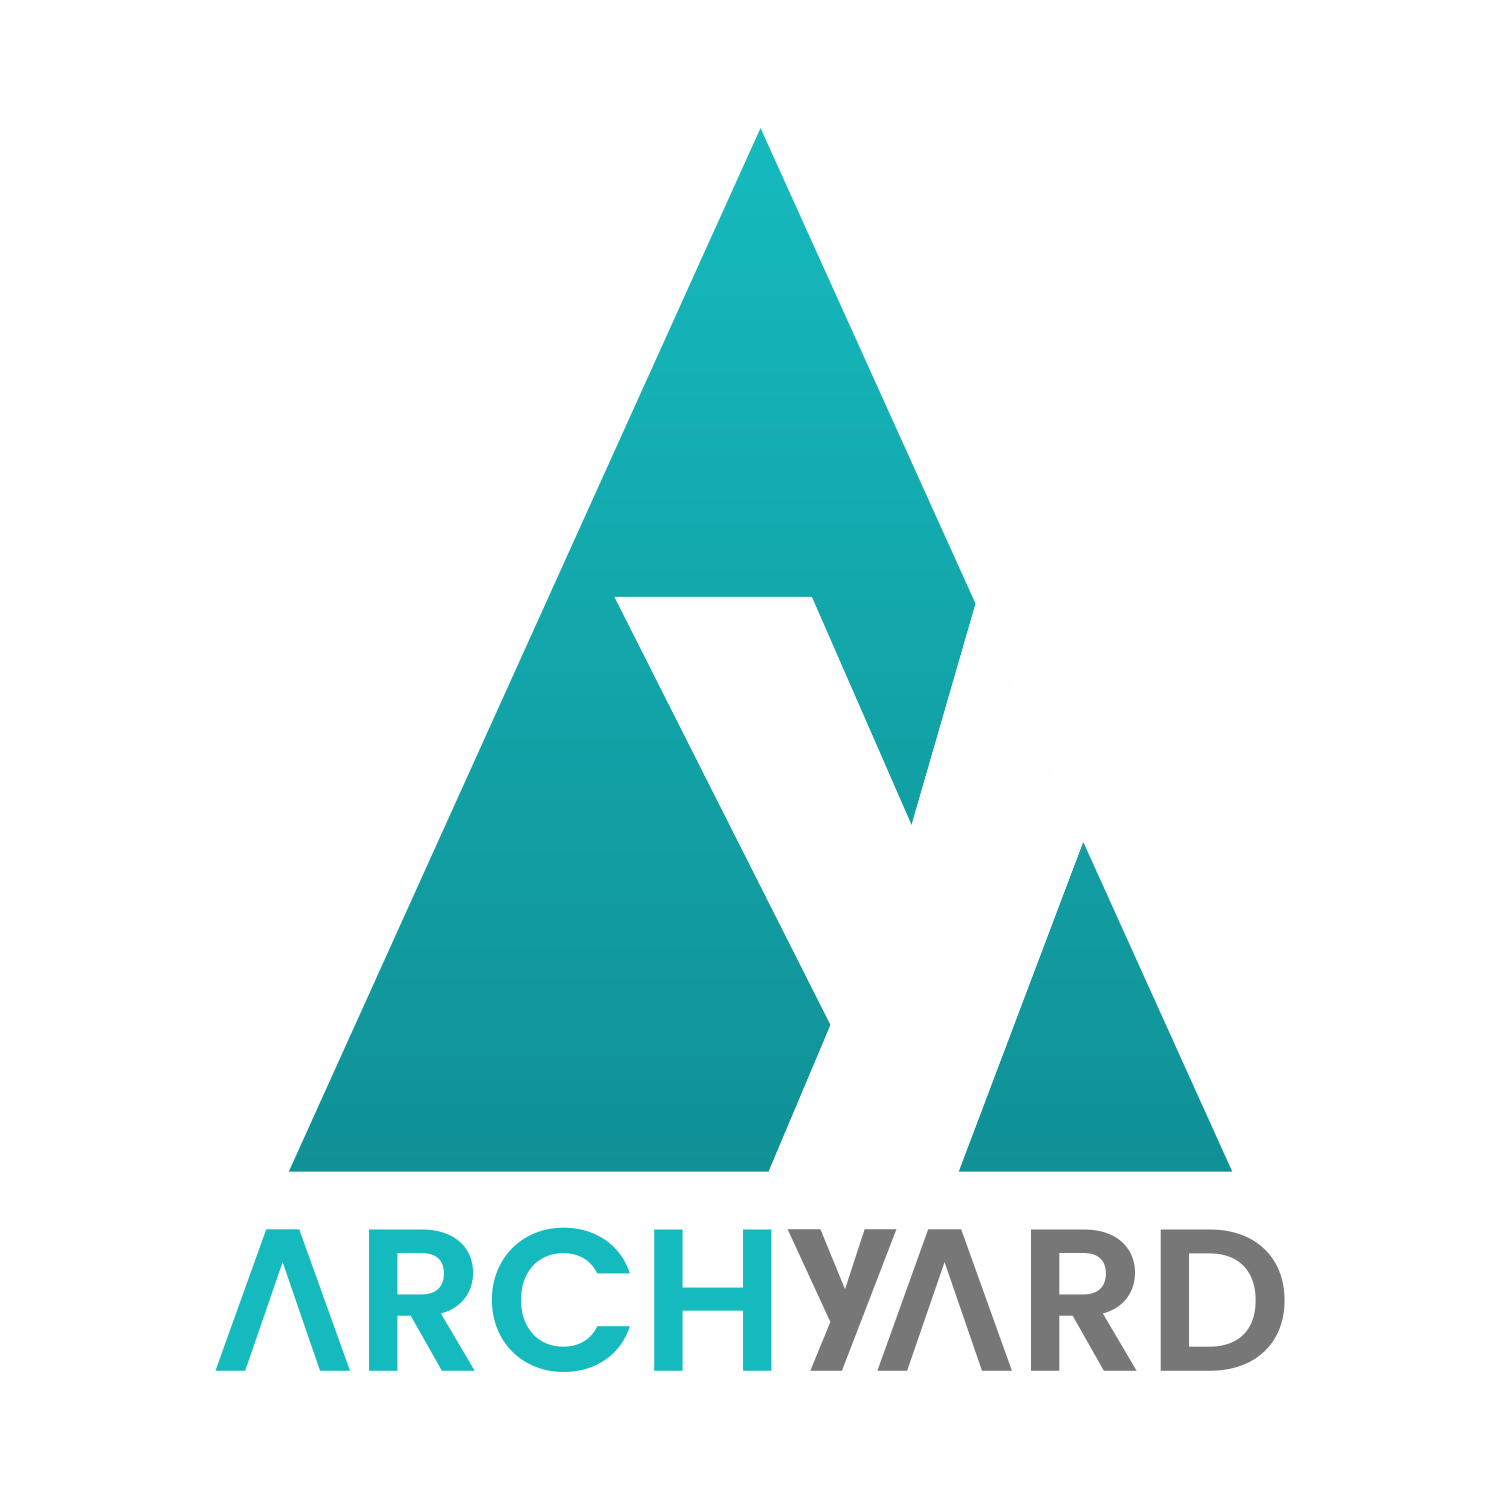 ArchYard|Legal Services|Professional Services